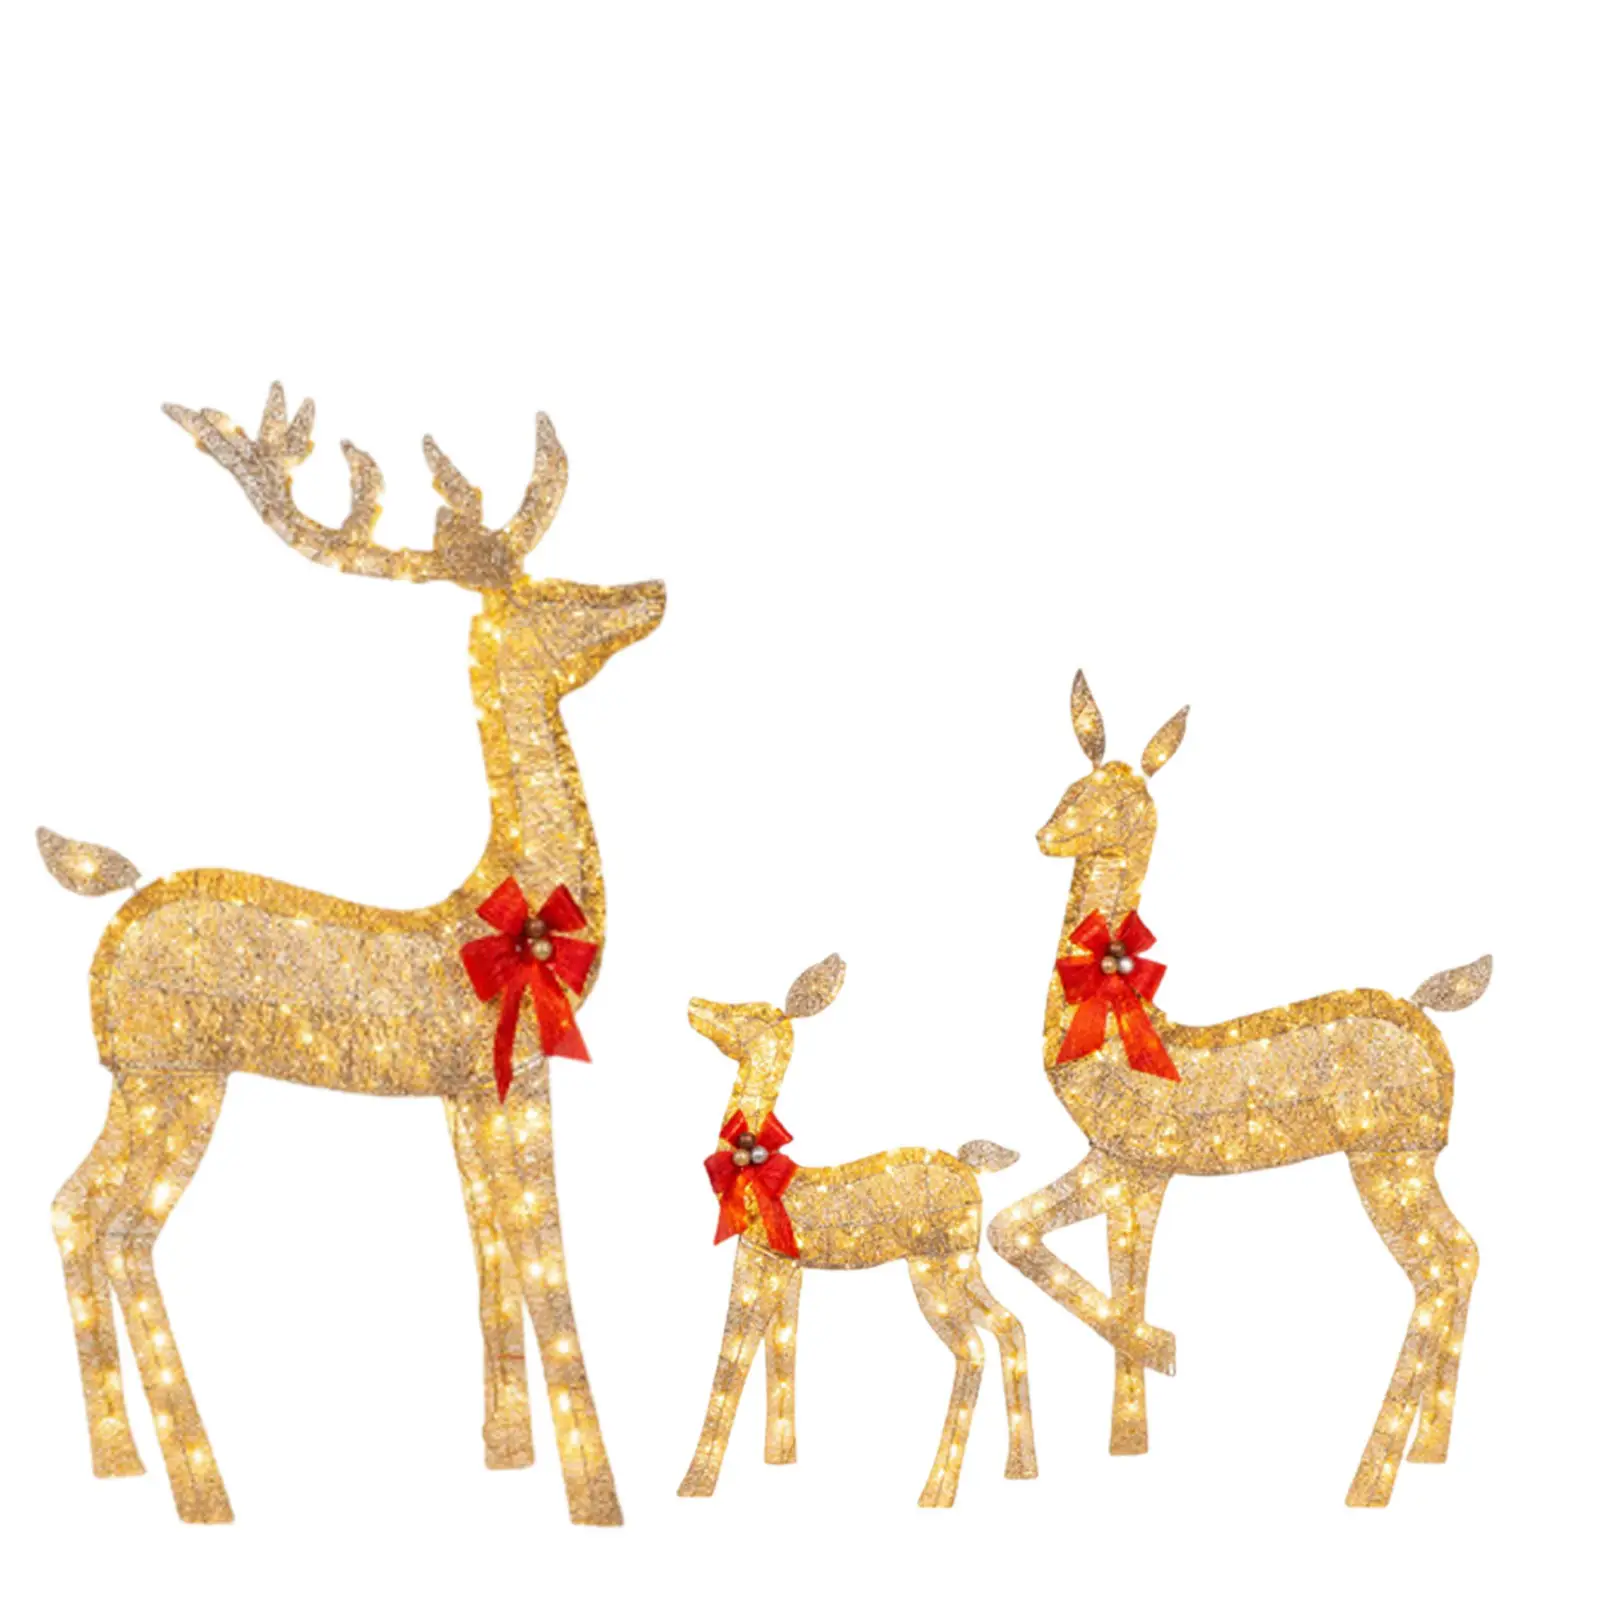 Factory Customized Large 3 Pack Lighted Reindeer Christmas Deer with LED Lights Outdoor Yard Decorations